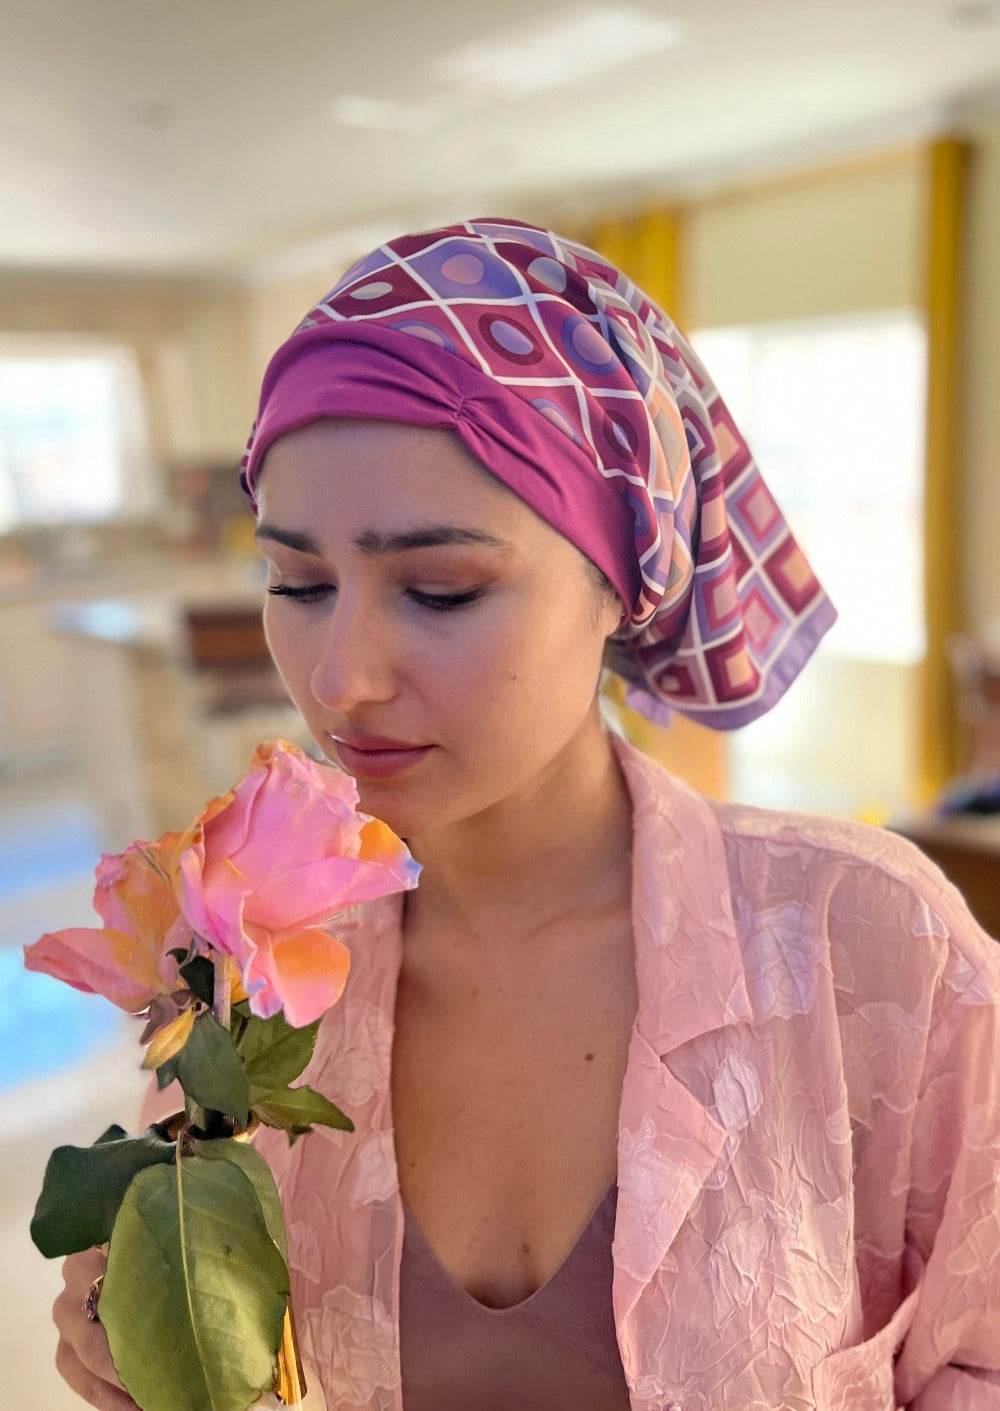 A lovely lady hold a vase with a gorgeous pink and yellow tone rose, she is smelling the flower. she has on a pink button down pj top. Her head is covered with a very attractive headscarf. The headscarf is made up of multipal layers, the base layer is a r